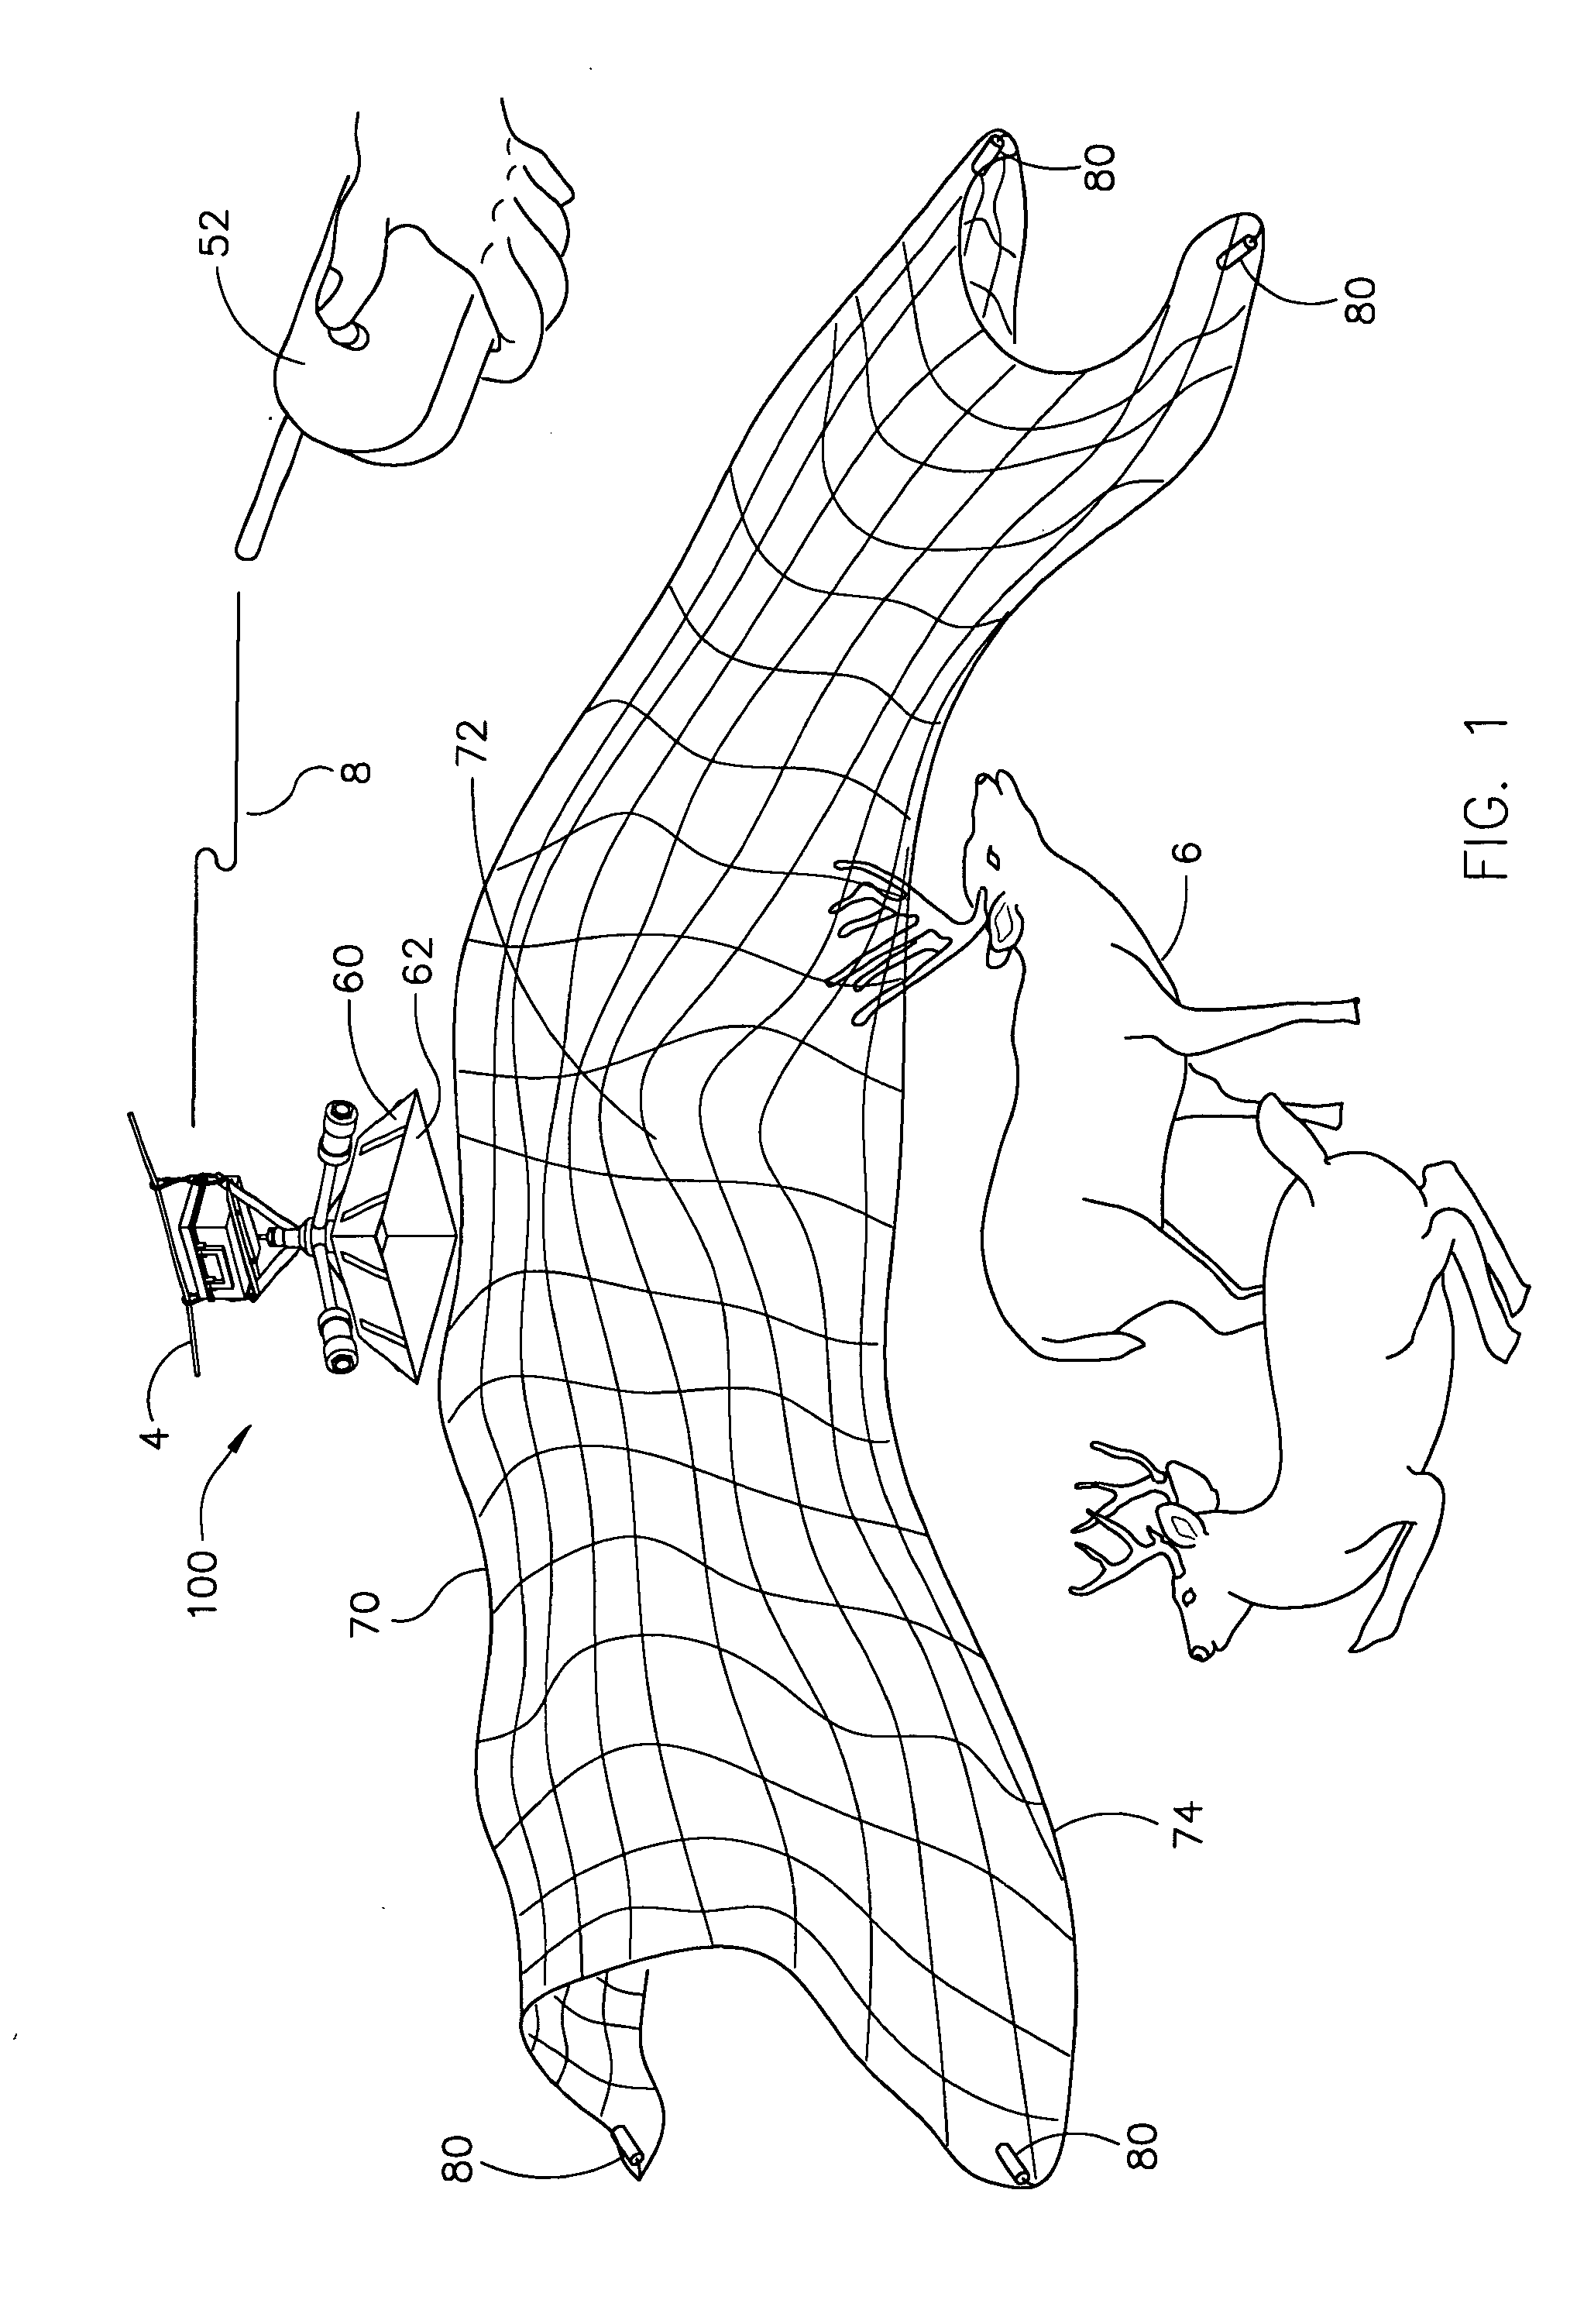 Method and apparatus for deploying an animal restraining net